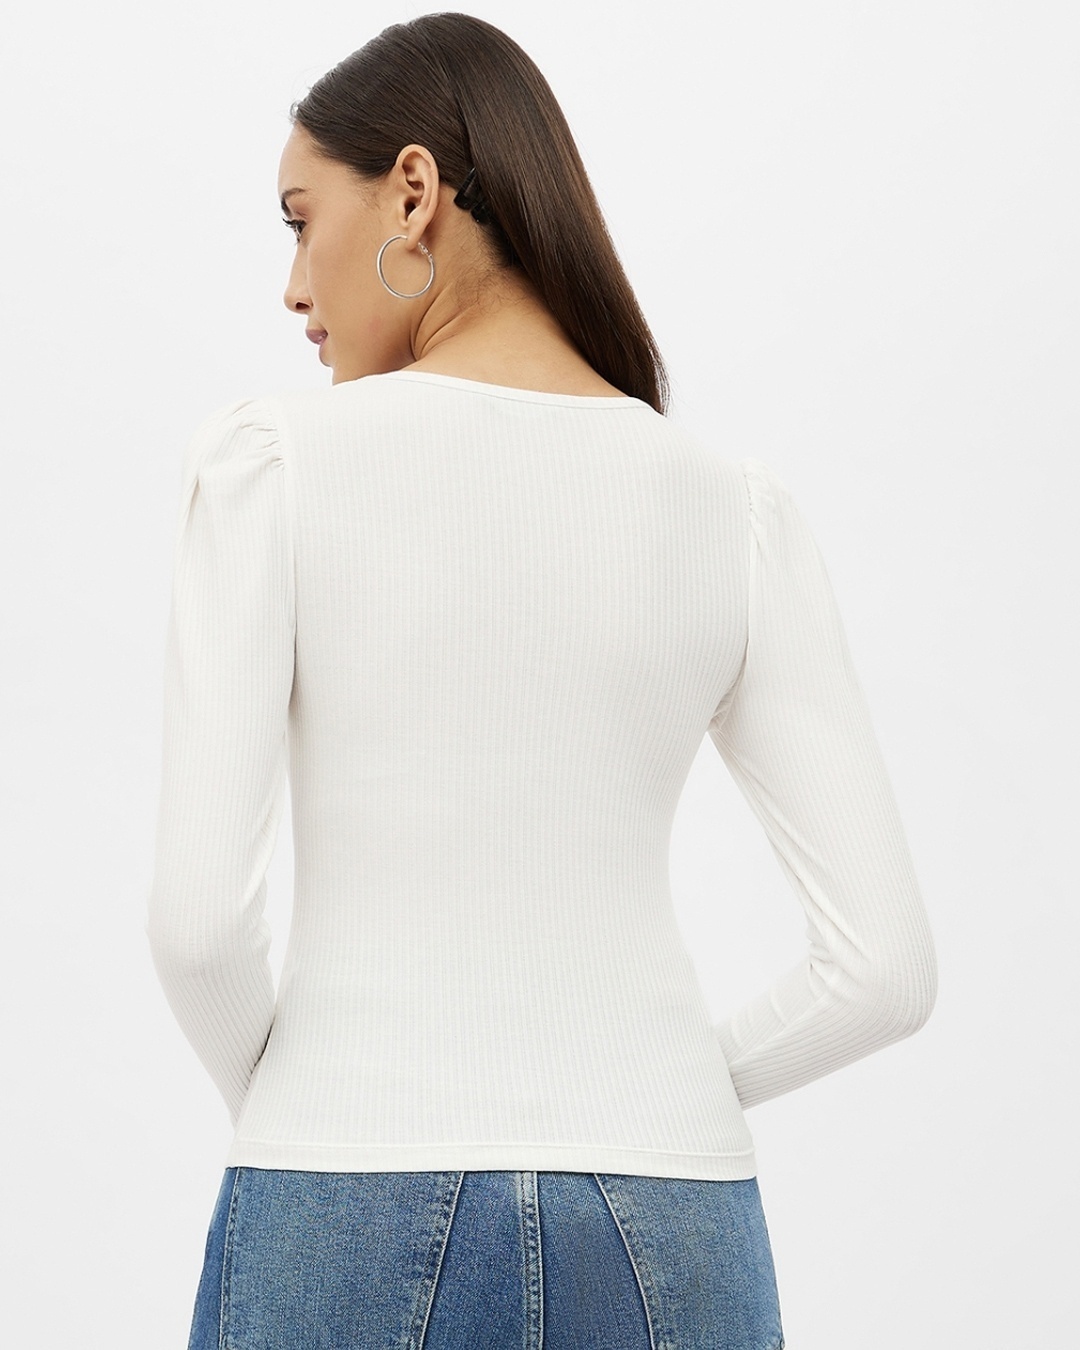 Shop Women's White Rayon Round Neck Long Puff Sleeve Top-Design